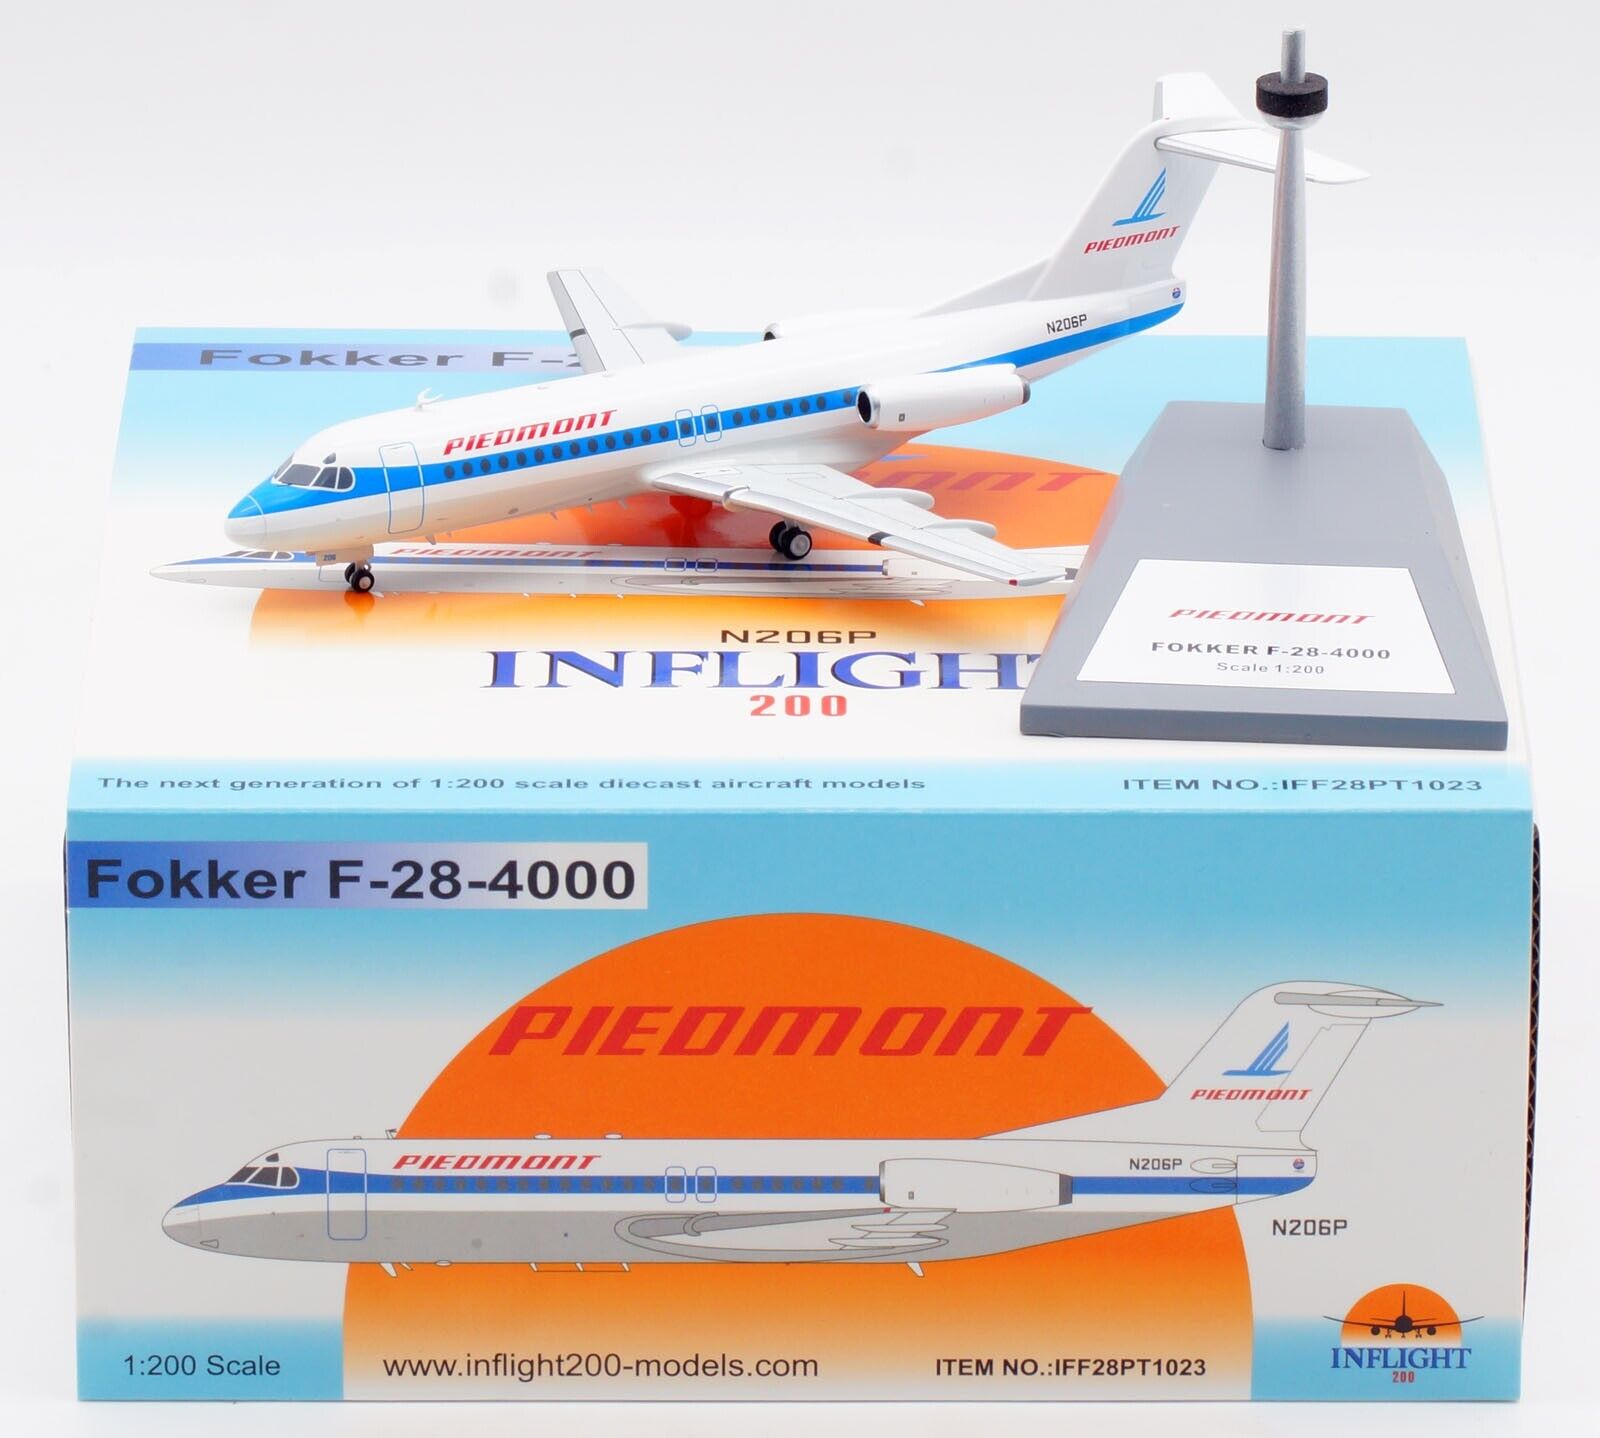 INFLIGHT 1:200 Piedmont Airlines FOKKER F-28-4000 Diecast Aircraft Model N206P